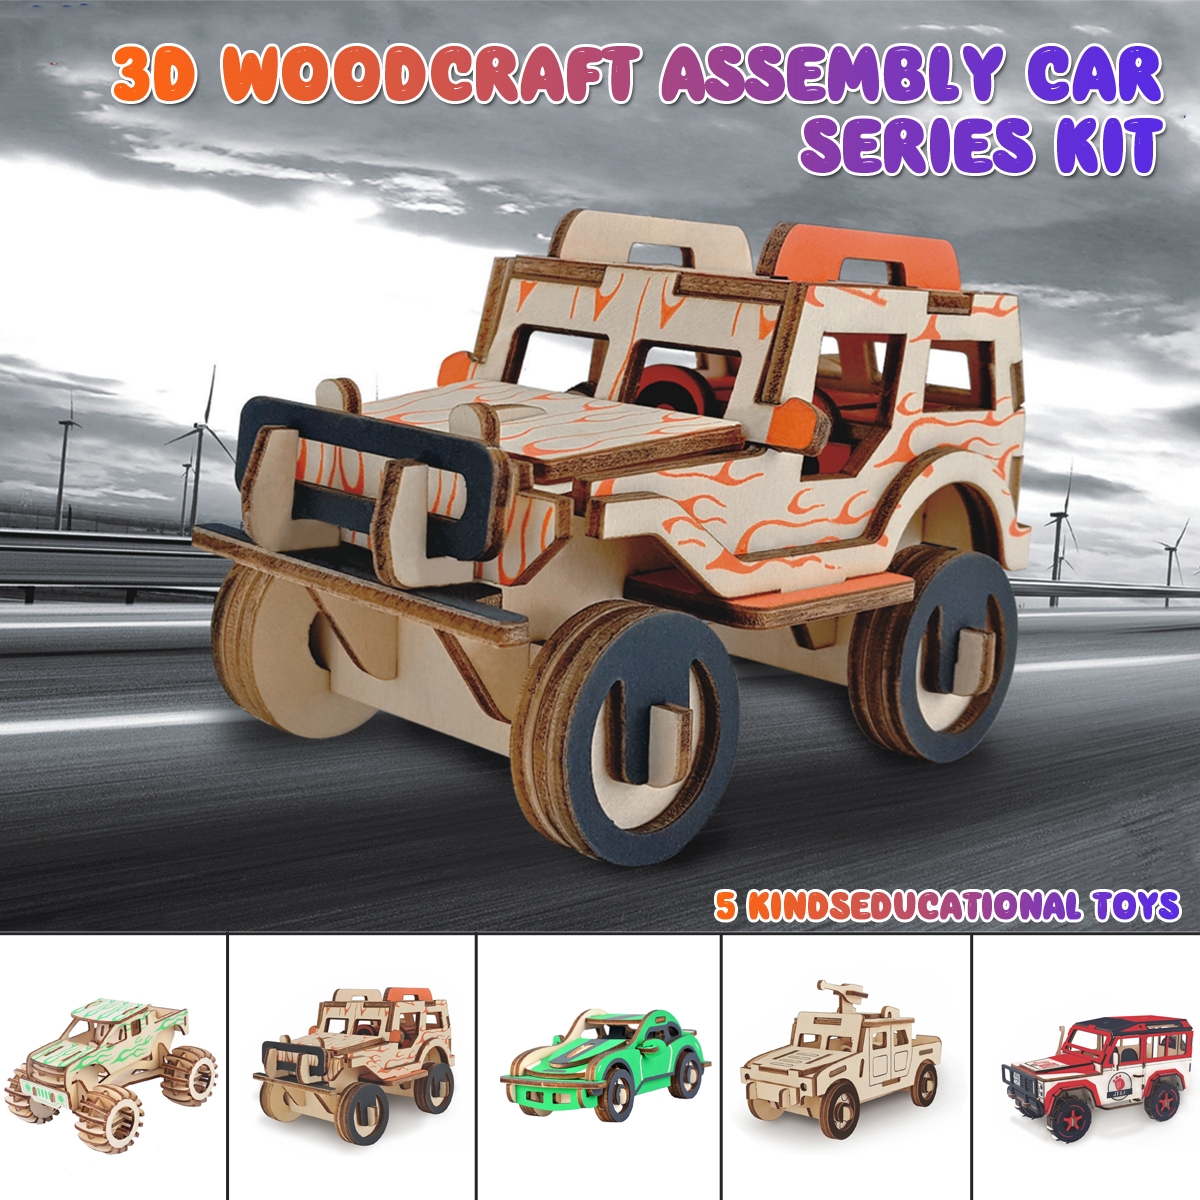 3D Woodcraft Assembly Car Series Kit Jigsaw Puzzle Decoration Toy Model for Kids Gift